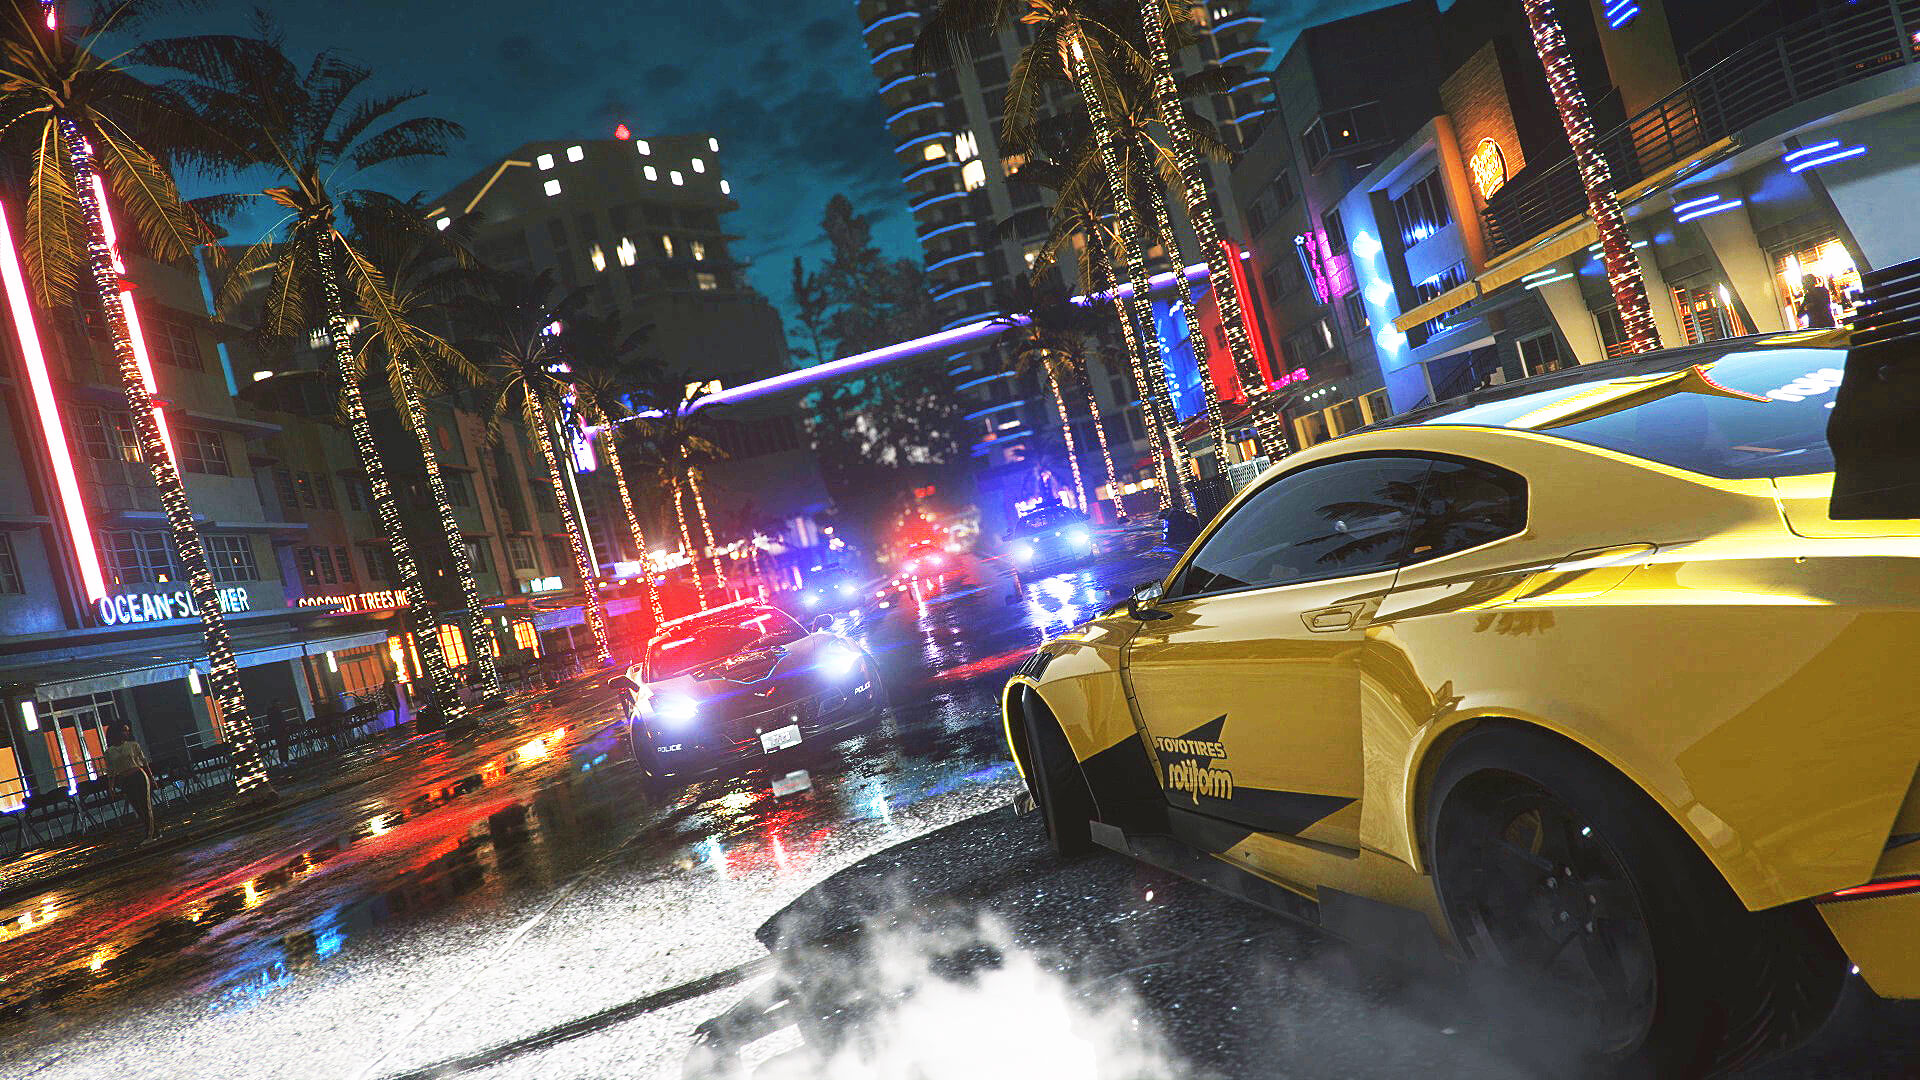 Need for Speed™ Heat Official Reveal Trailer 